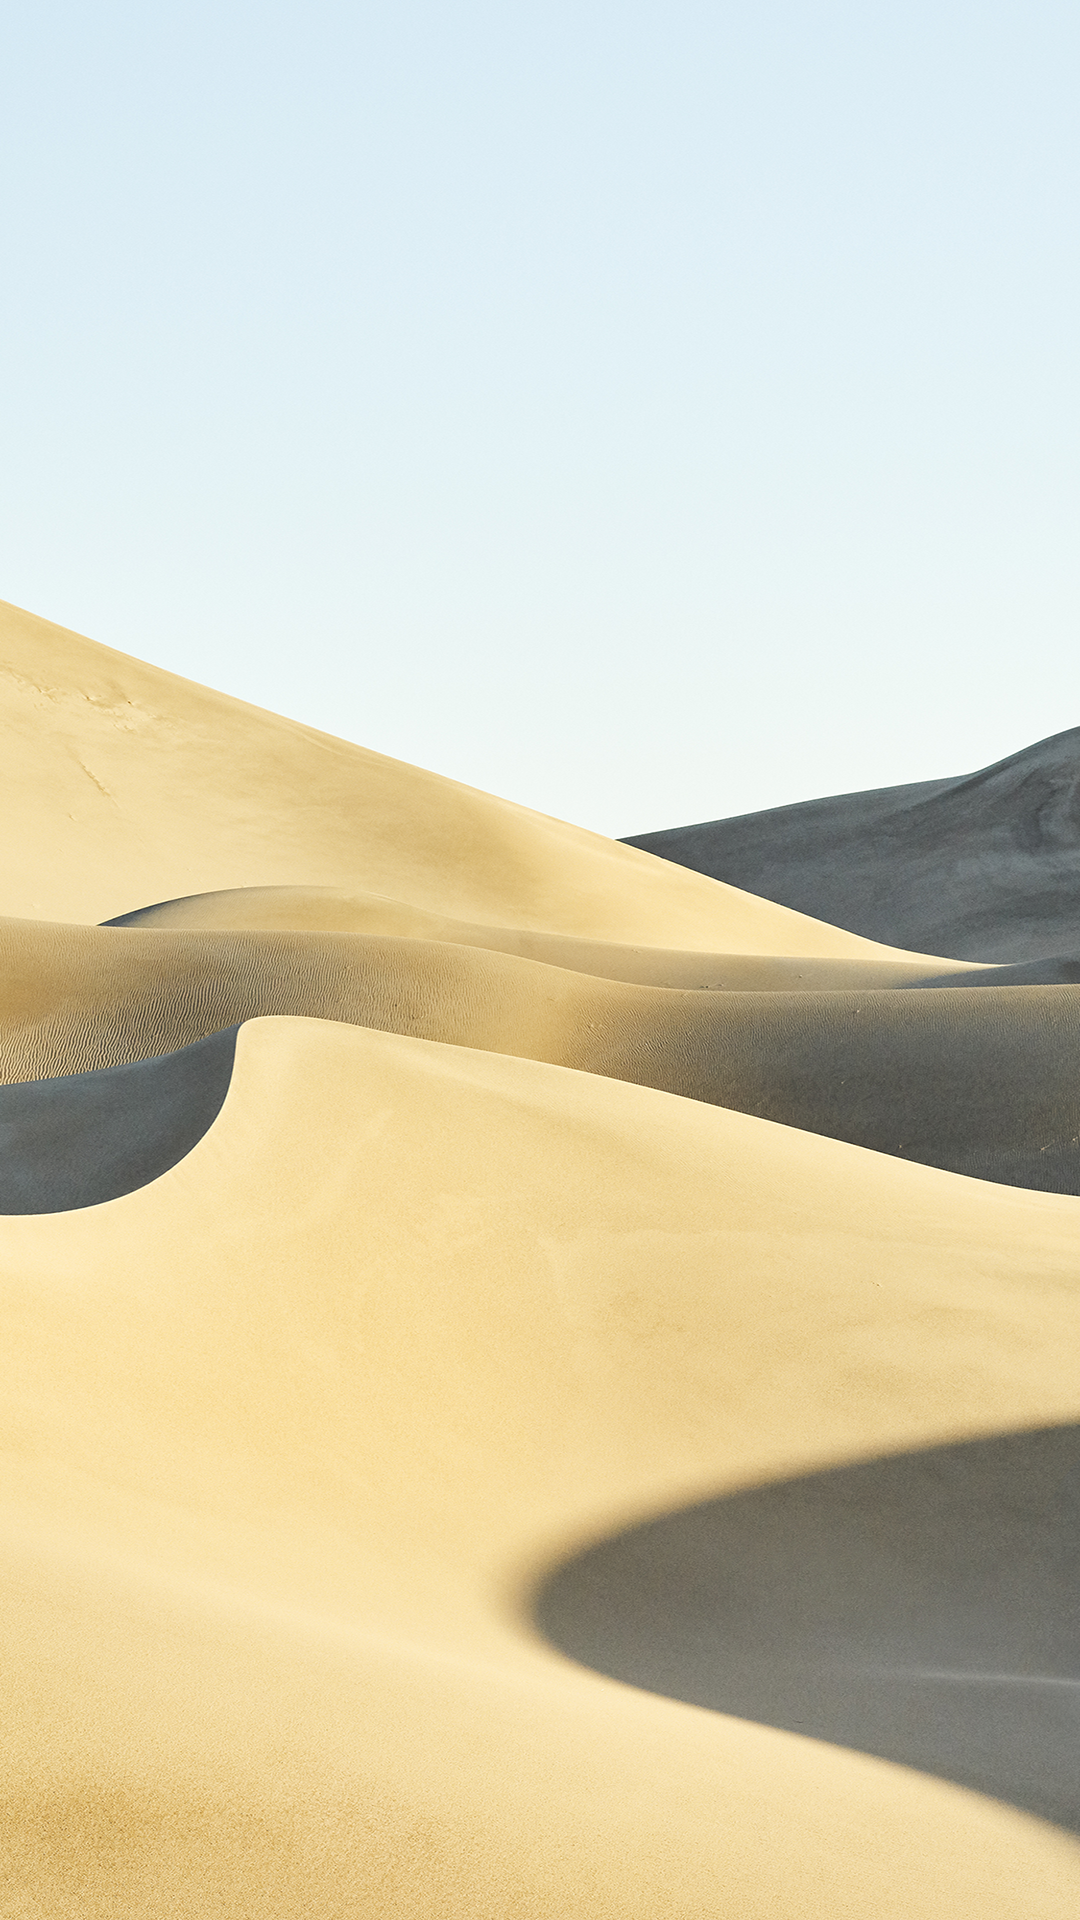 Every macOS Mojave wallpaper for iPhone